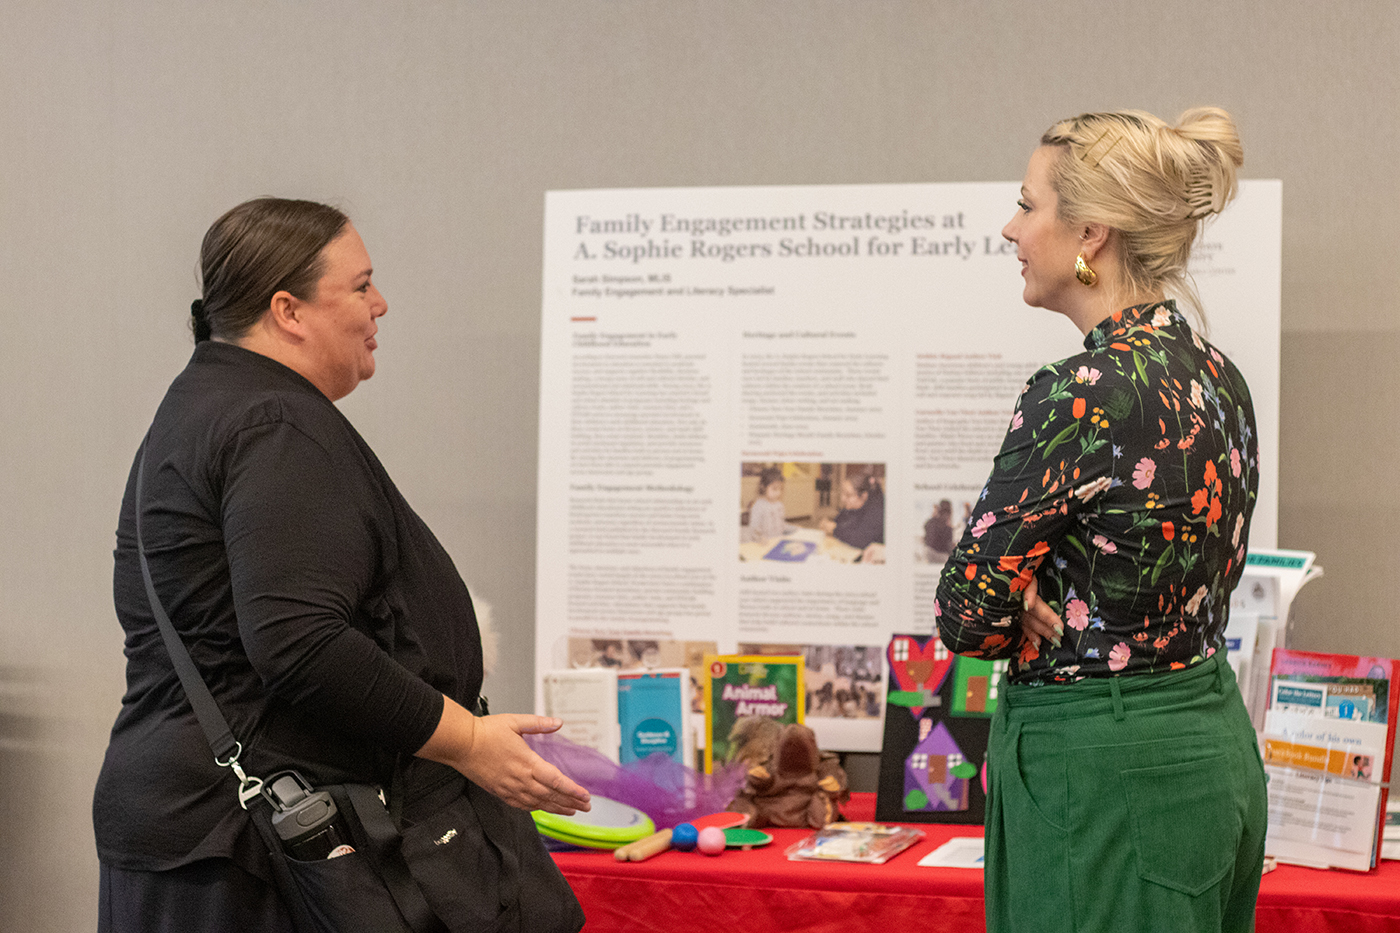 Two people speak in front of a poster display at the 2023 Crane Symposium on Children. The poster display describes family engagement strategies at Ohio State's A. Sophie Rogers School for Early Learning, and in front of the poster is a table on which are children's books, toys and informational handouts.